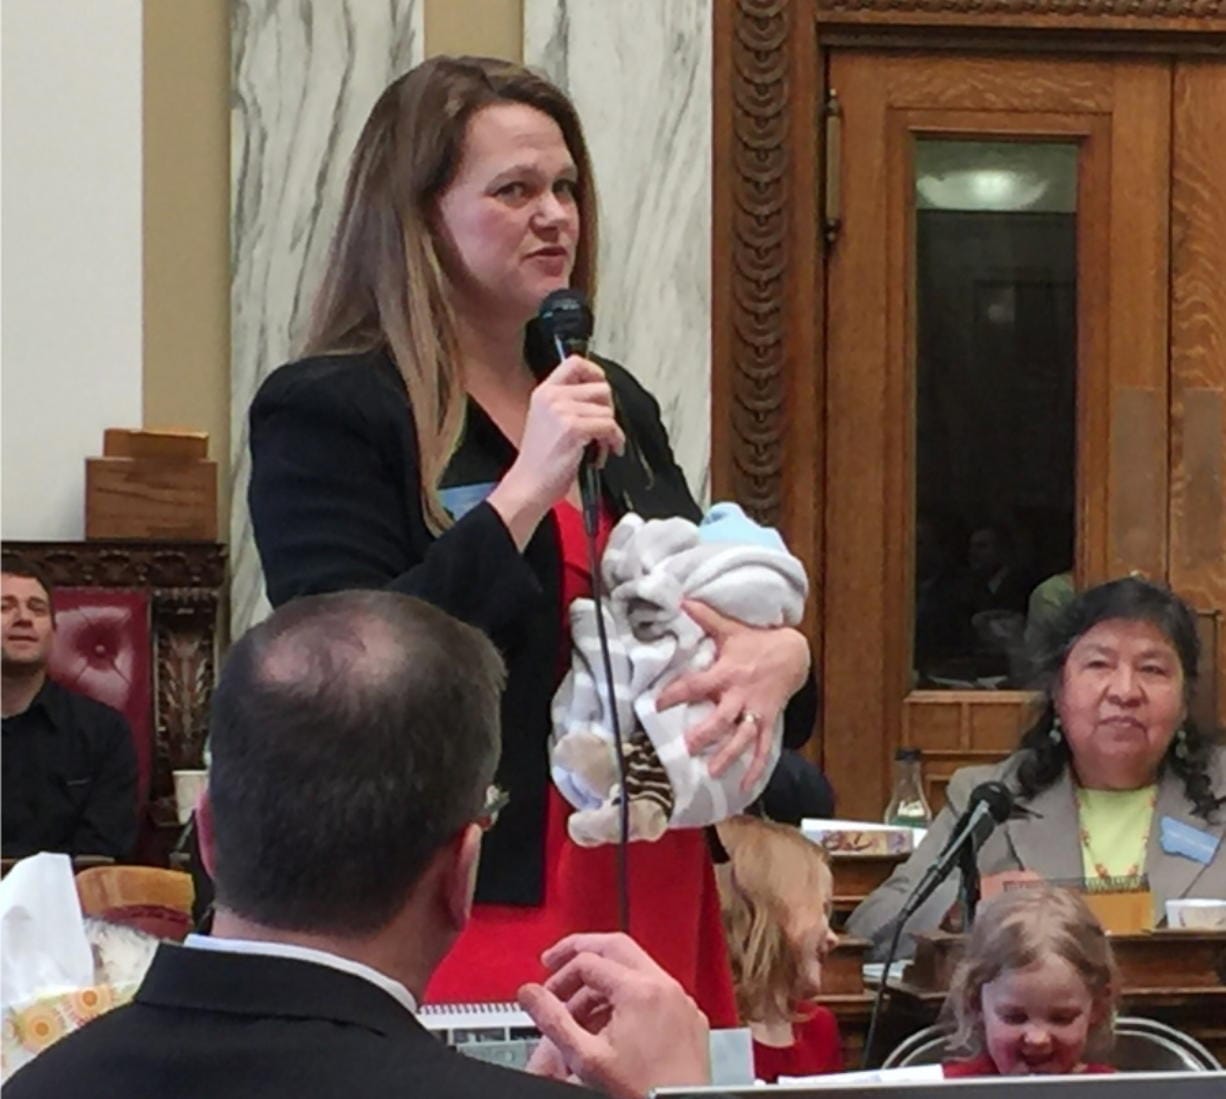 In this March 2017, photo, provided by Rep. Kimberly Dudik, Dudik speaks on the floor of the legislature holding her newborn son Marcutio in Helena, Mont. As experts predict another banner year of women running for office, hurdles remain particularly for those like Dudik who have young children. Only six states have laws specifically allowing the use of campaign funds for child care. In most states, including Montana, the law is silent on the issue and up to interpretation by state agencies or boards. (Rep. Nate McConnell/Rep.